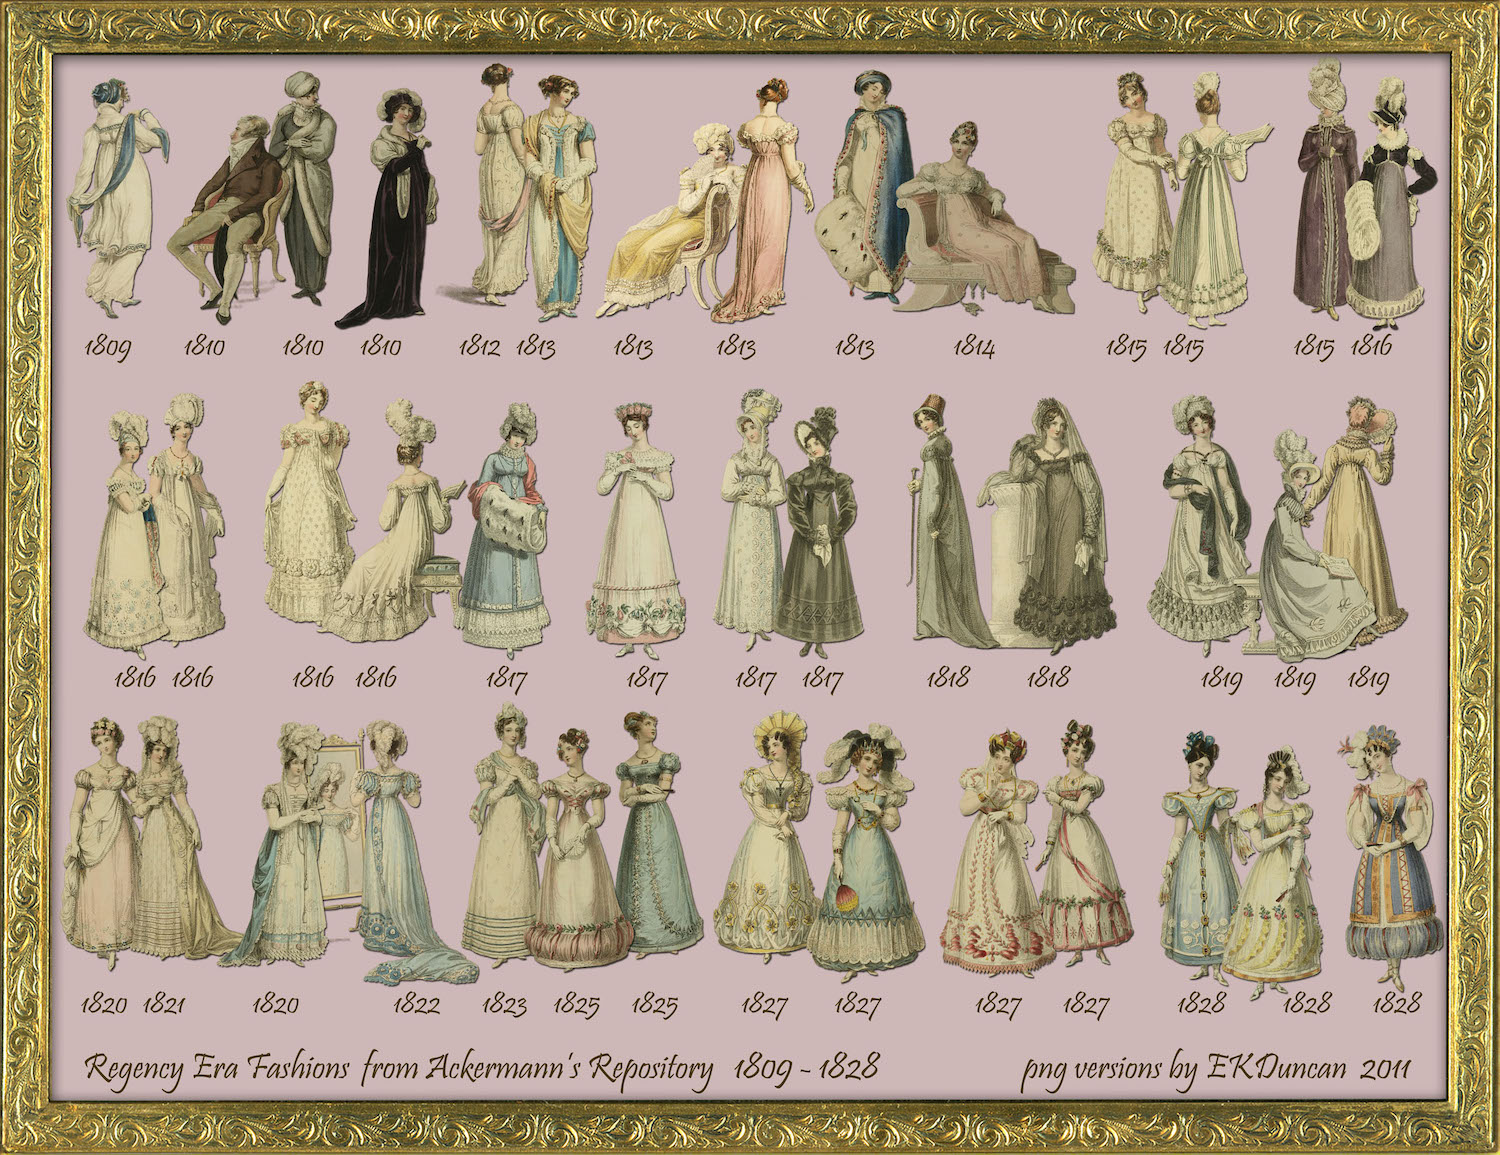 Cost of a Woman's Clothing in the Regency Era